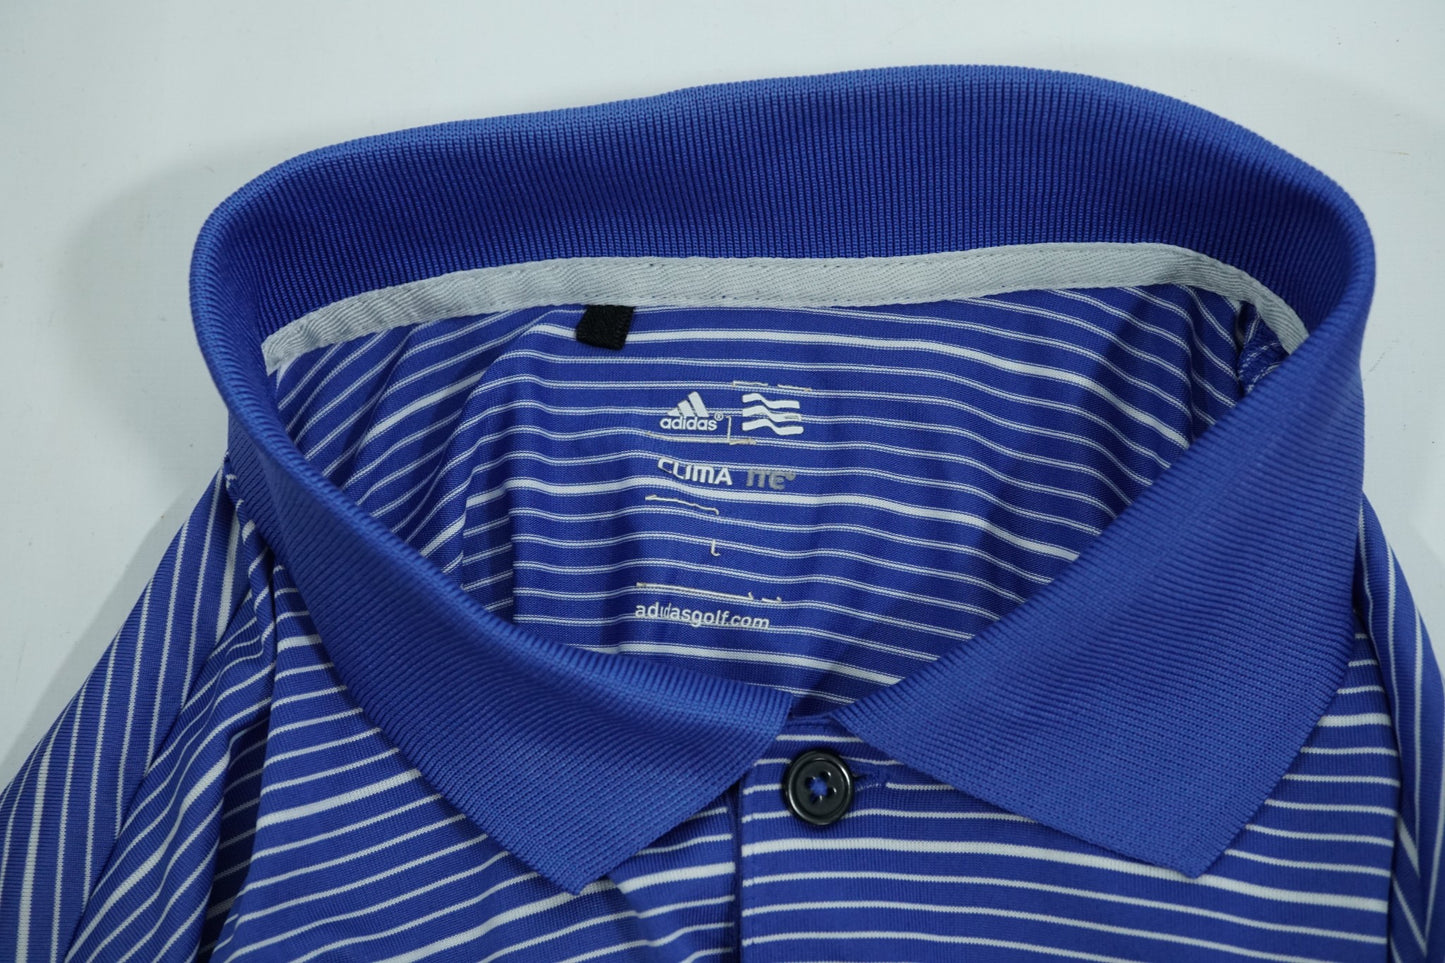 Adidas Golf Polo / L / Blue and White